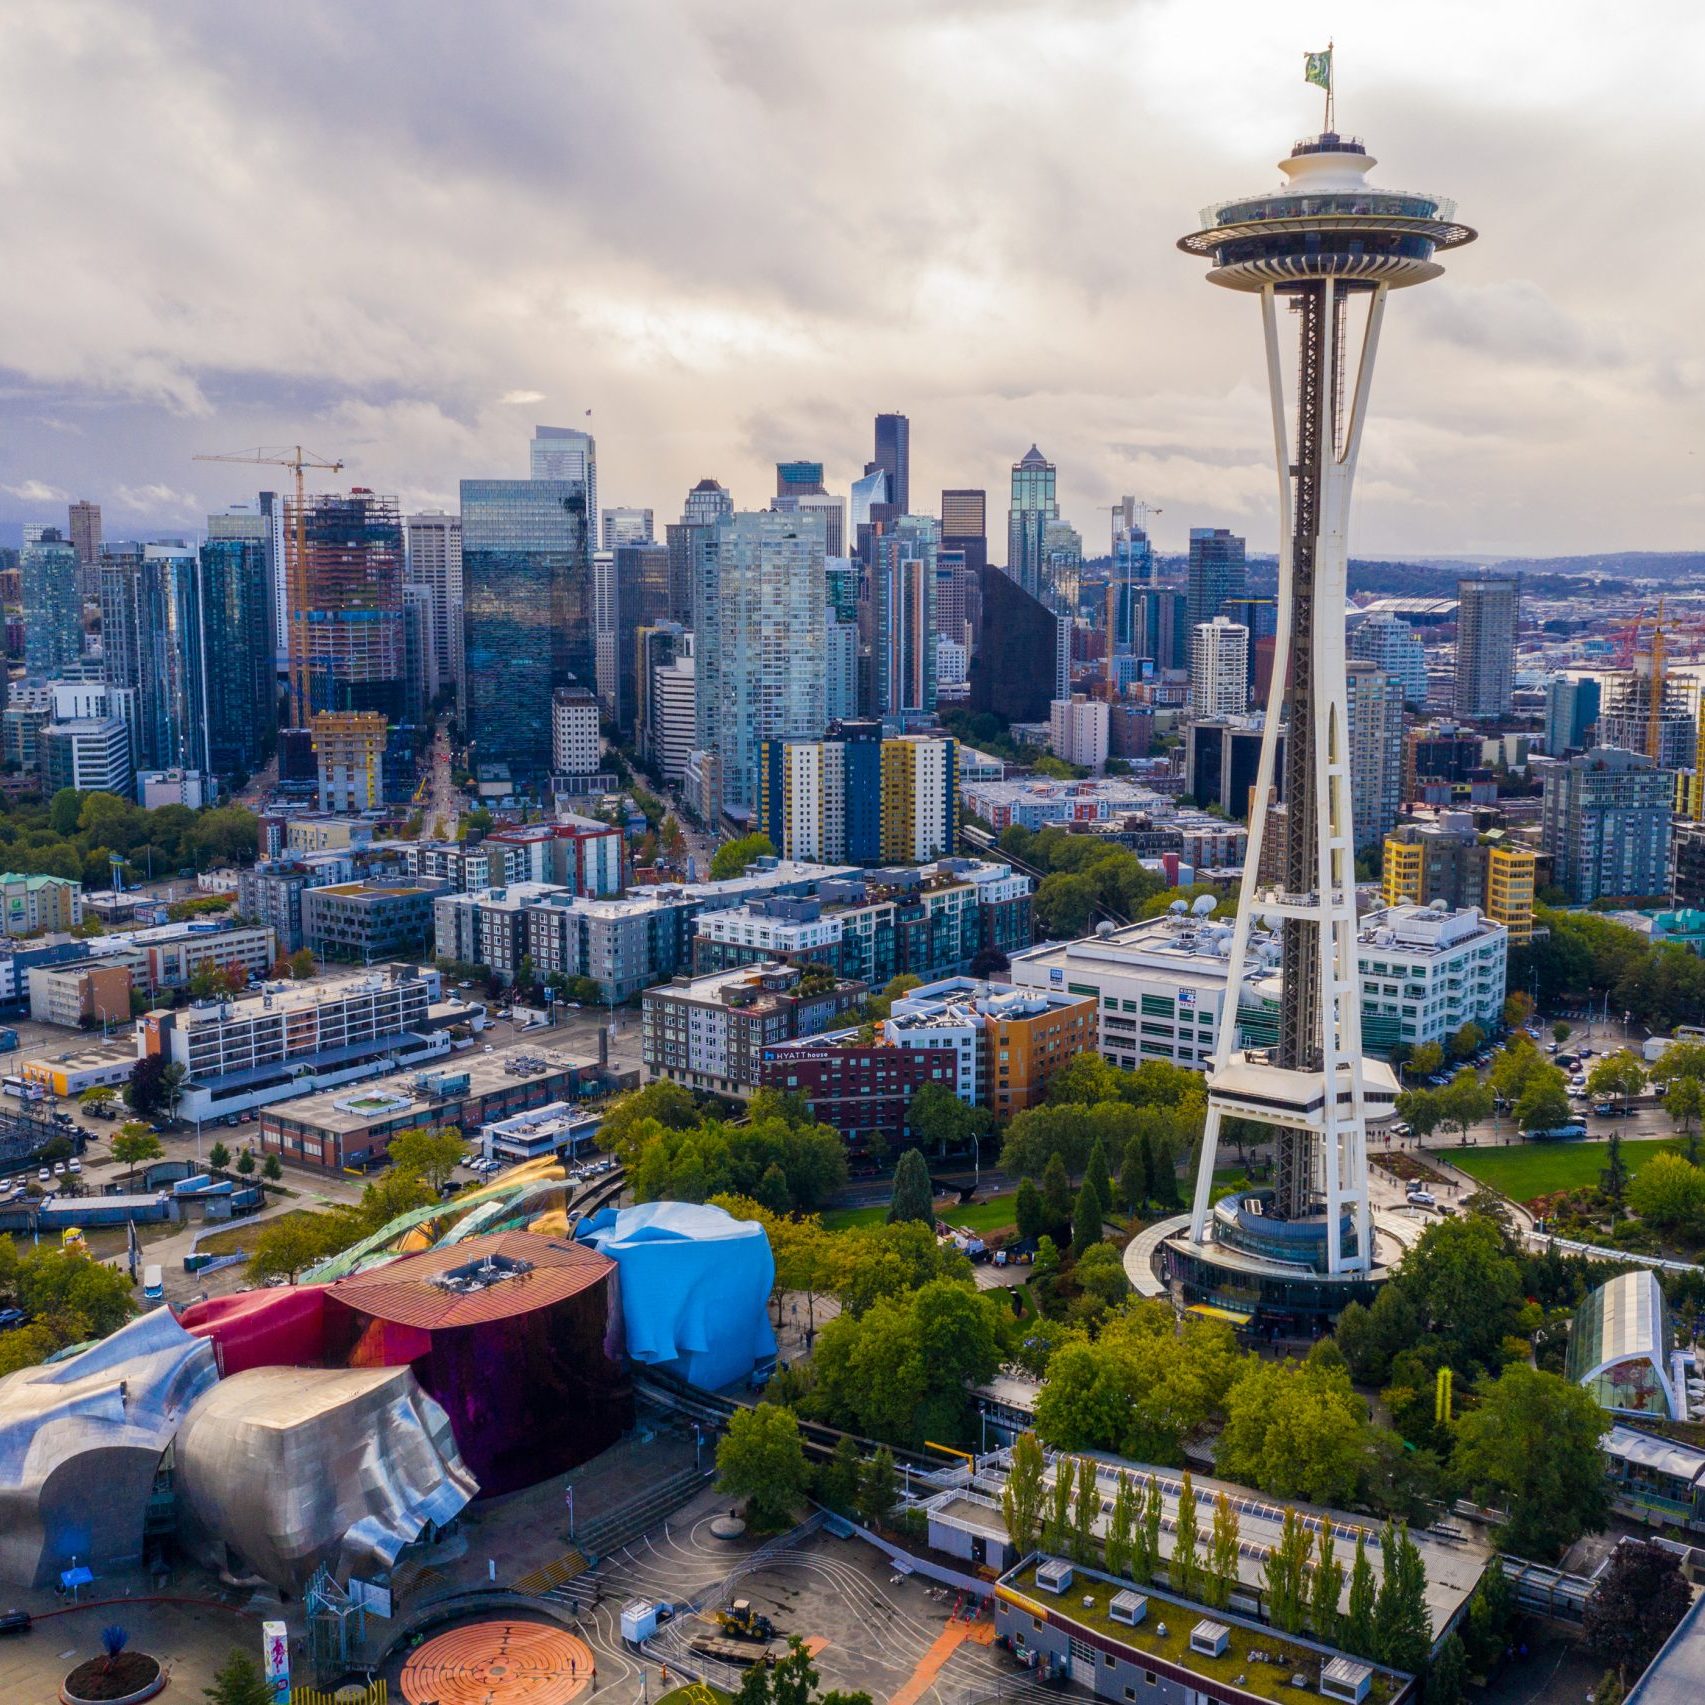 Aerial drone photo of the Seattle Space Needle and downtown